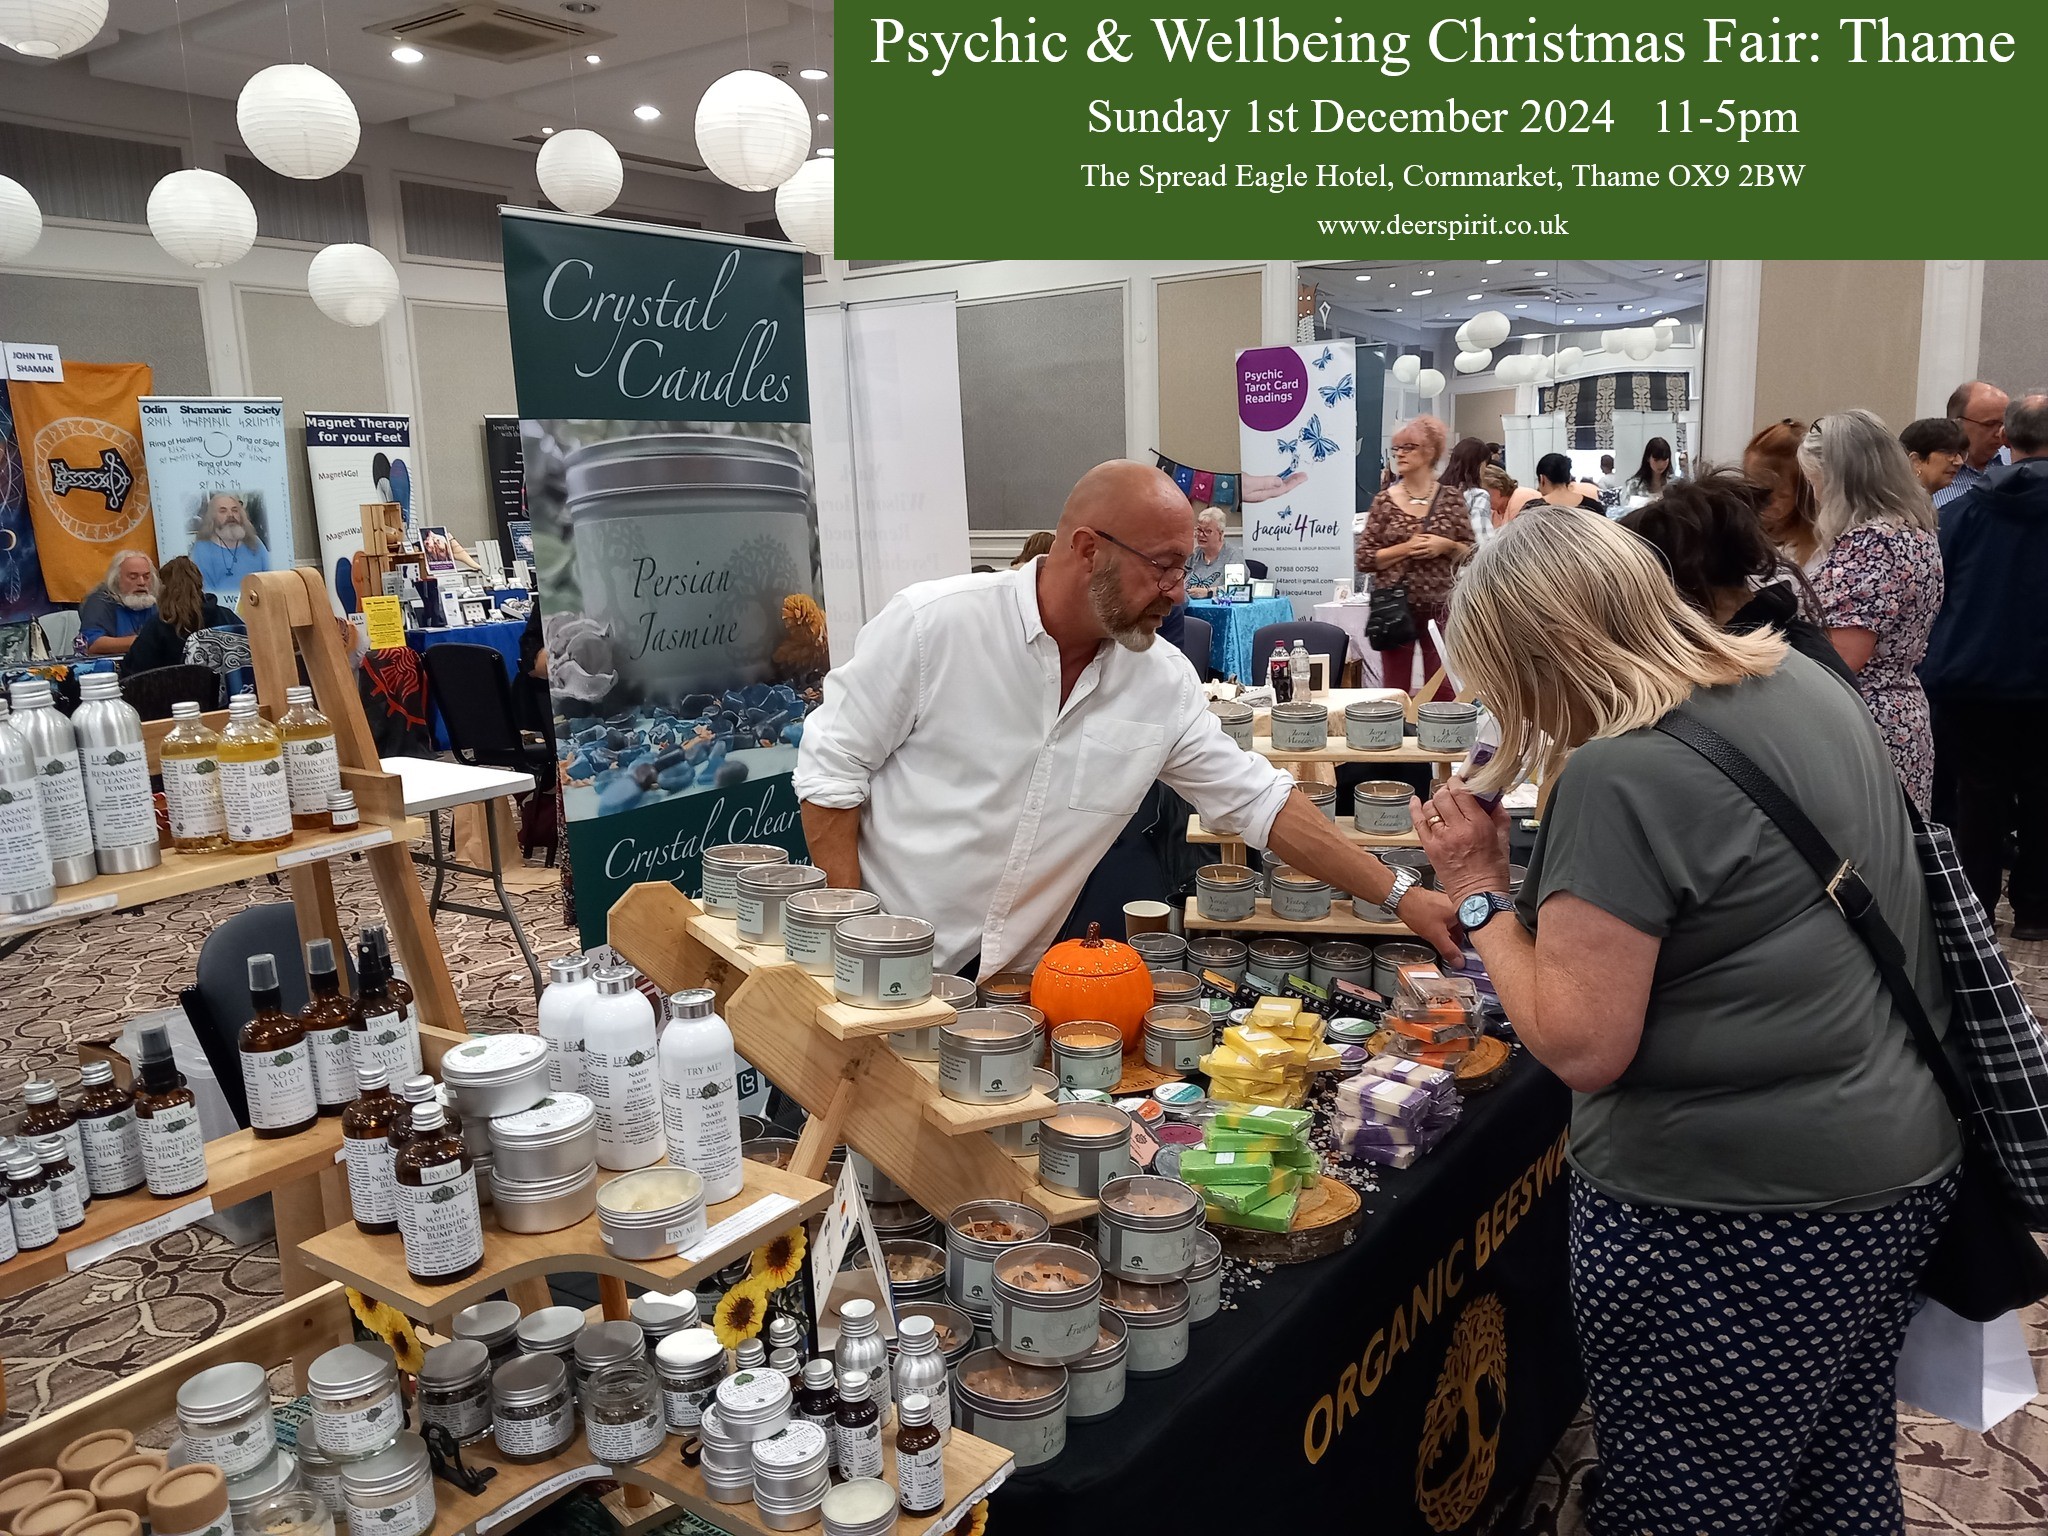 Thame's Christmas Psychic & Wellbeing Fair